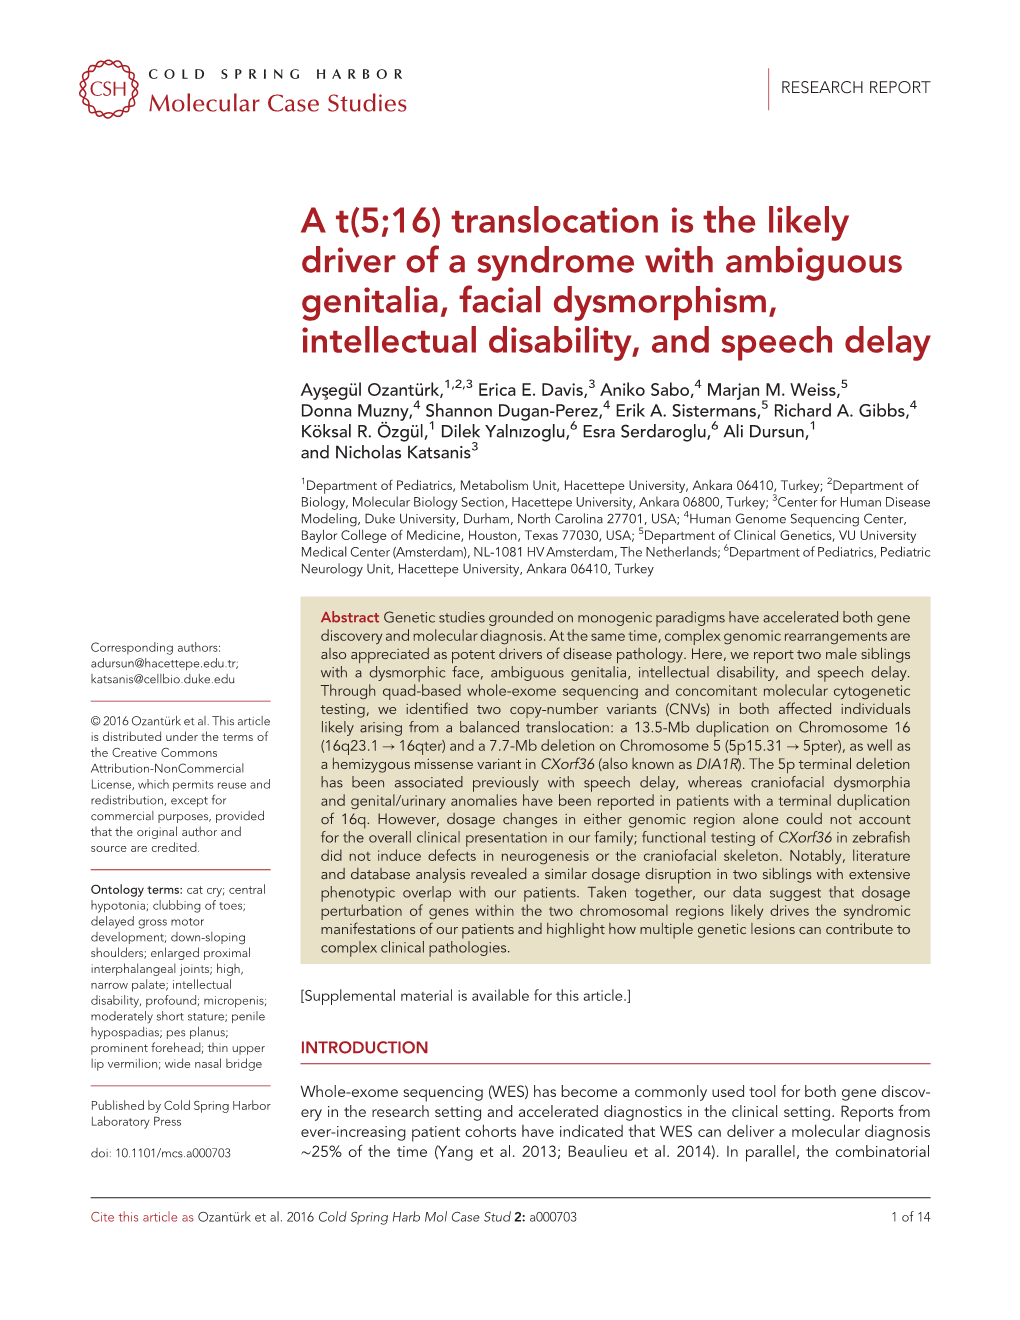 Translocation Is the Likely Driver of a Syndrome with Ambiguous Genitalia, Facial Dysmorphism, Intellectual Disability, and Speech Delay